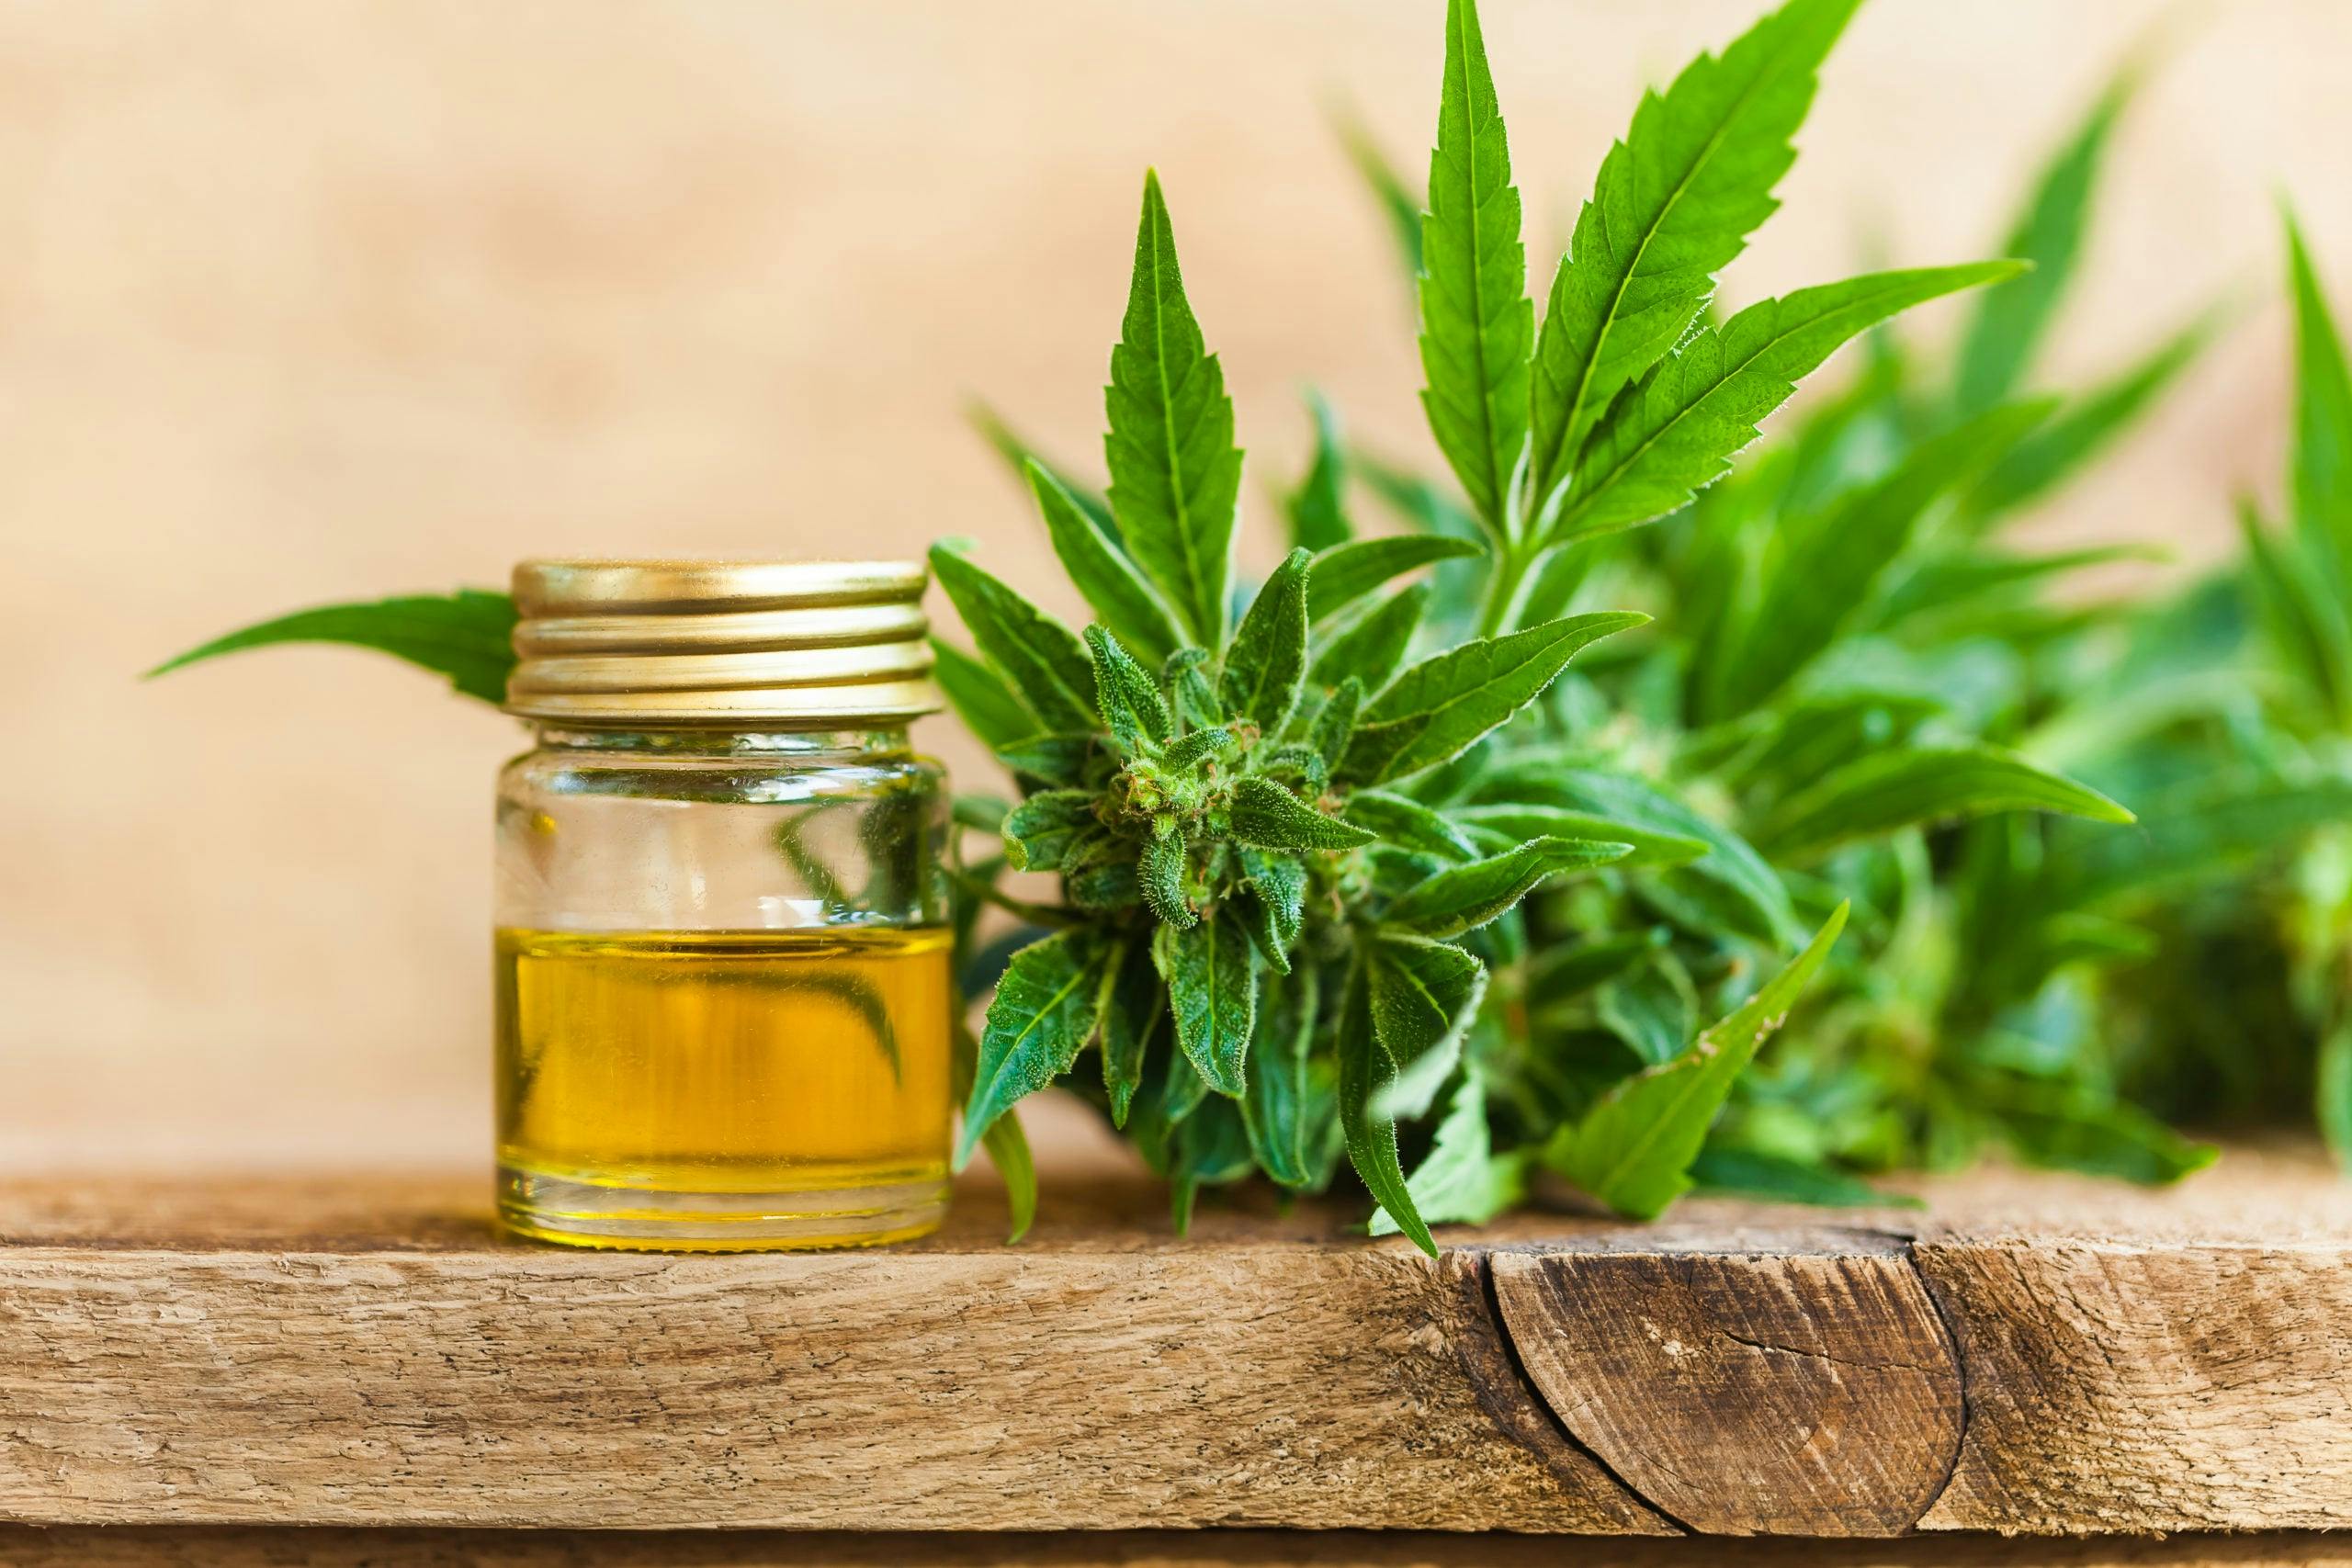 Does CBD Oil Expire? 8 Things to Know